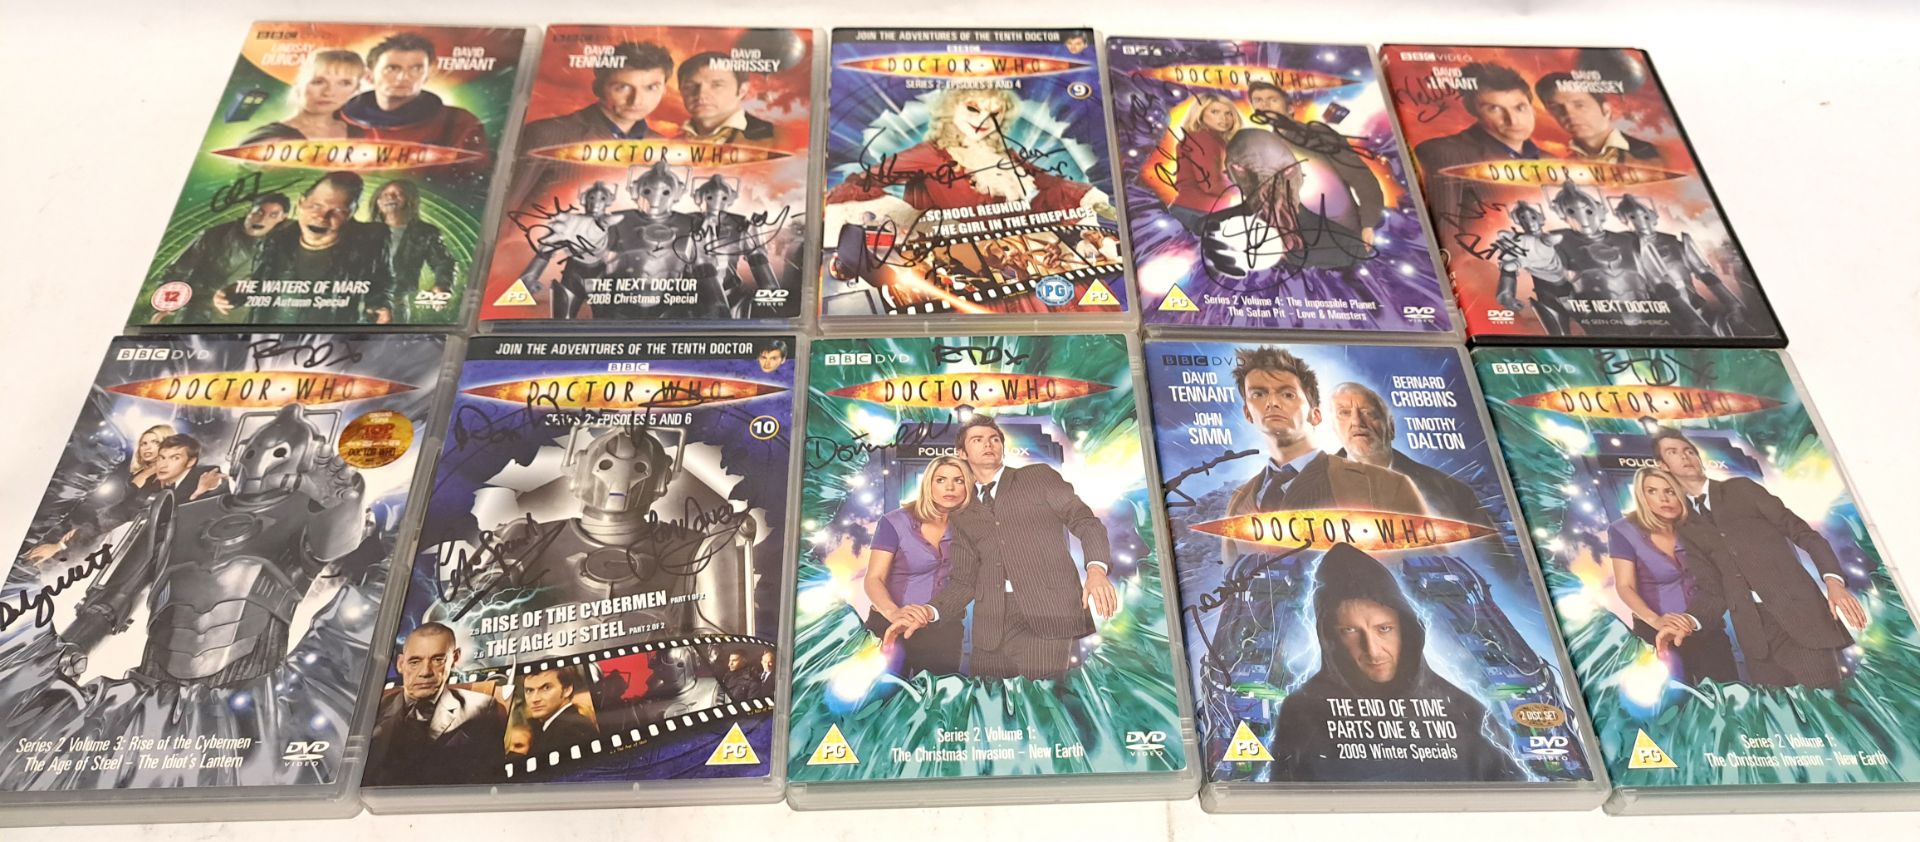 Autographed 10th Doctor Era Doctor Who DVDs